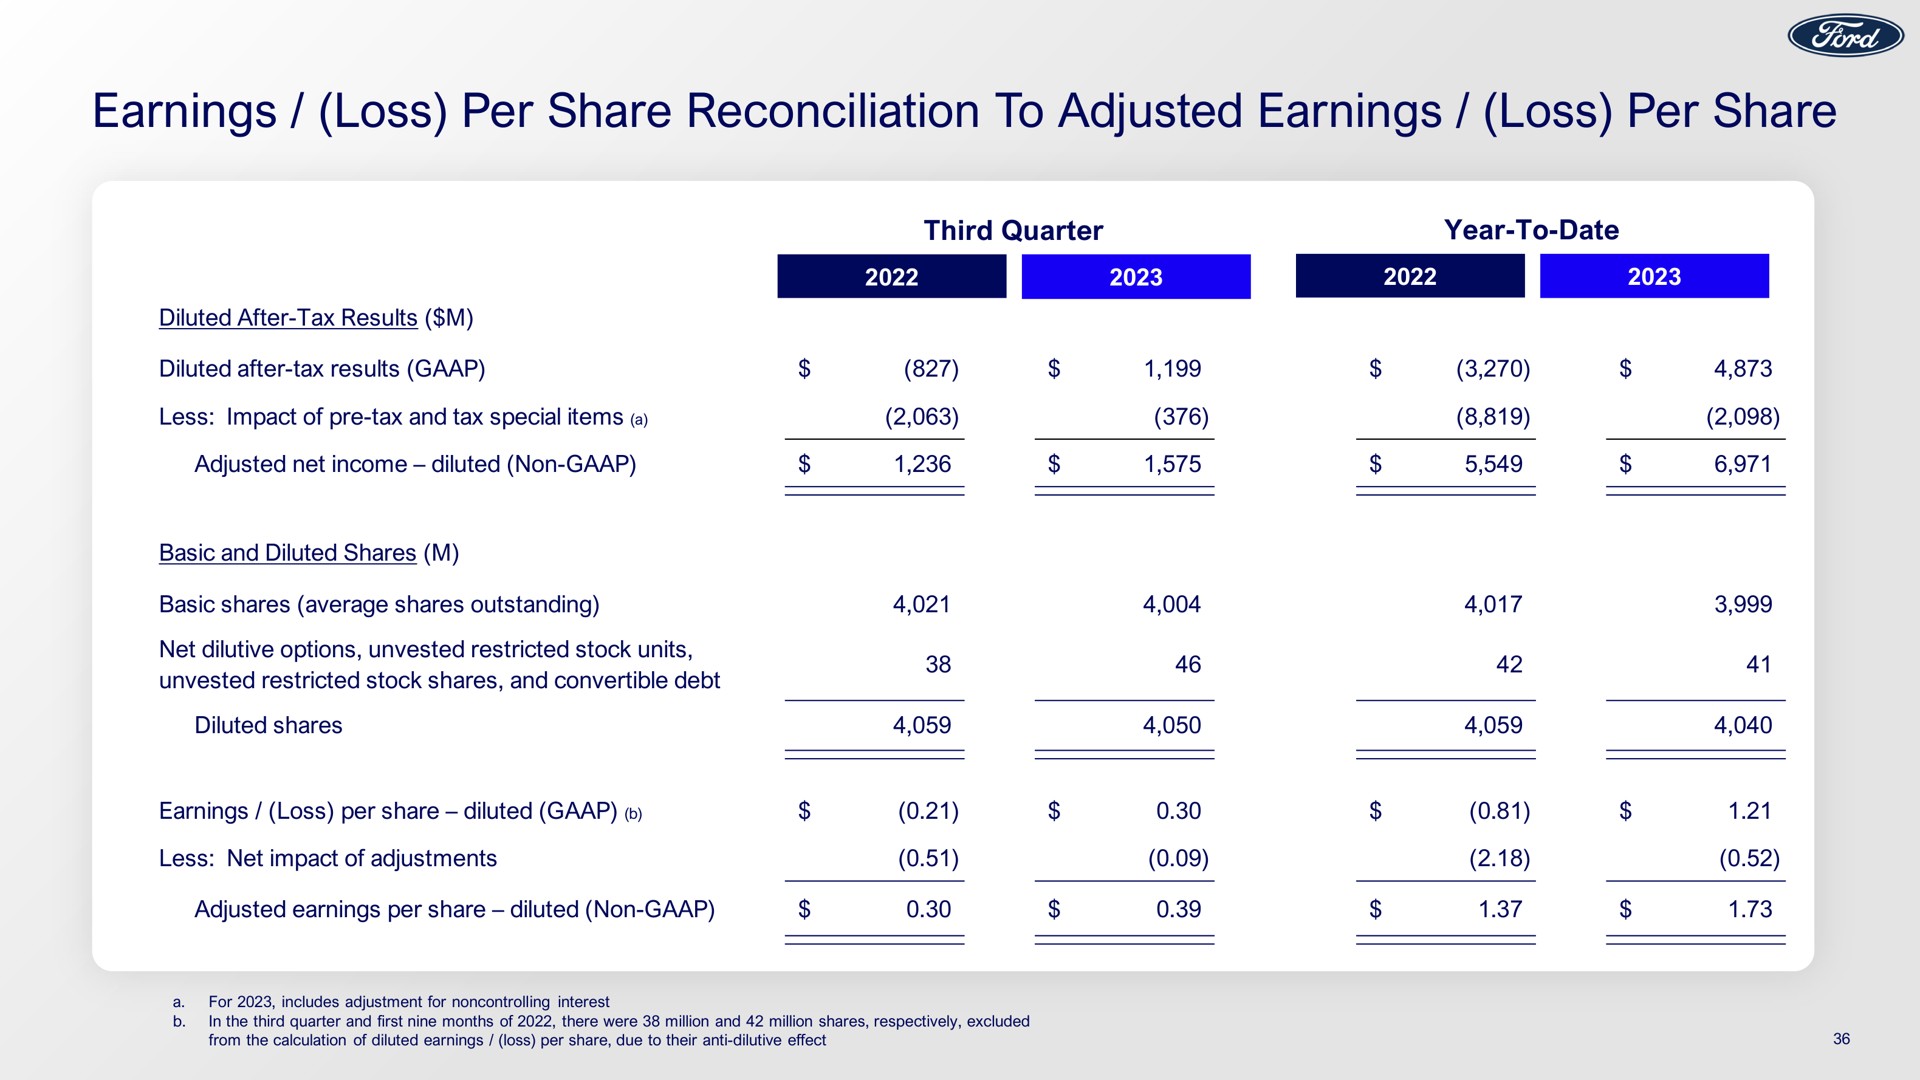 earnings loss per share reconciliation to adjusted earnings loss per share | Ford